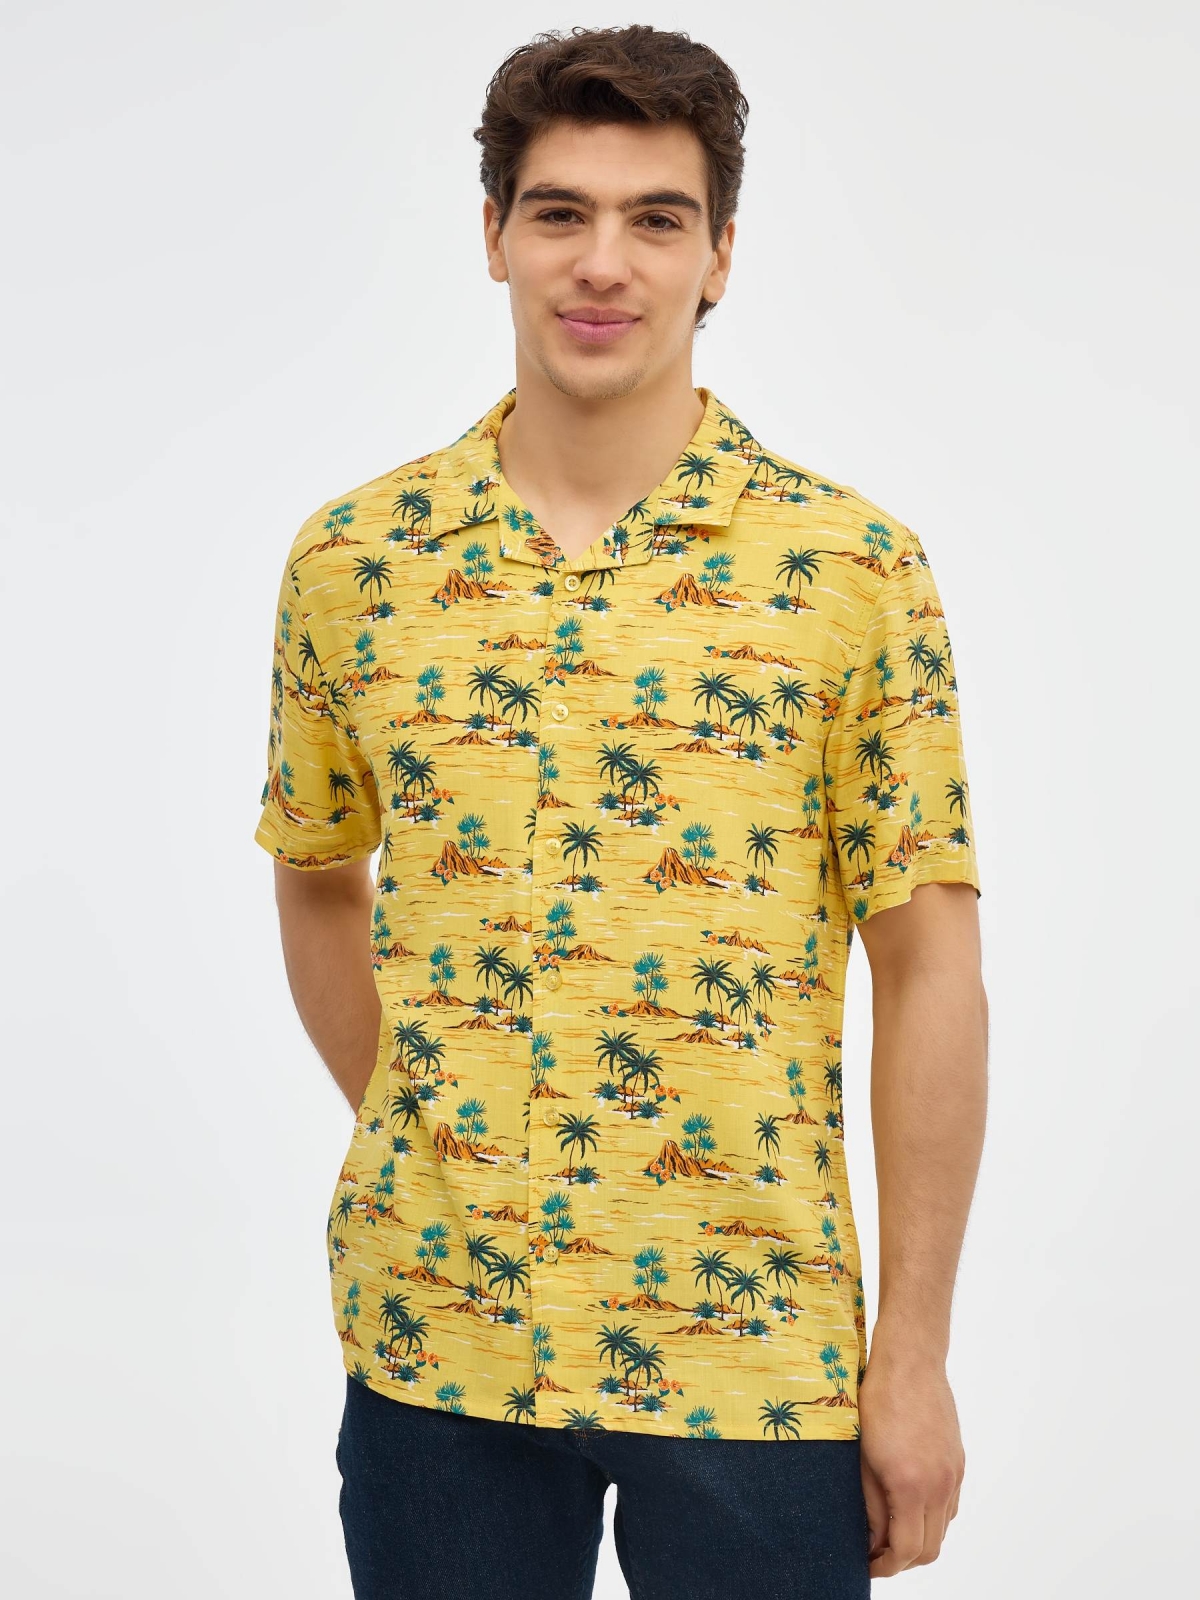 Total print palm tree shirt yellow middle front view